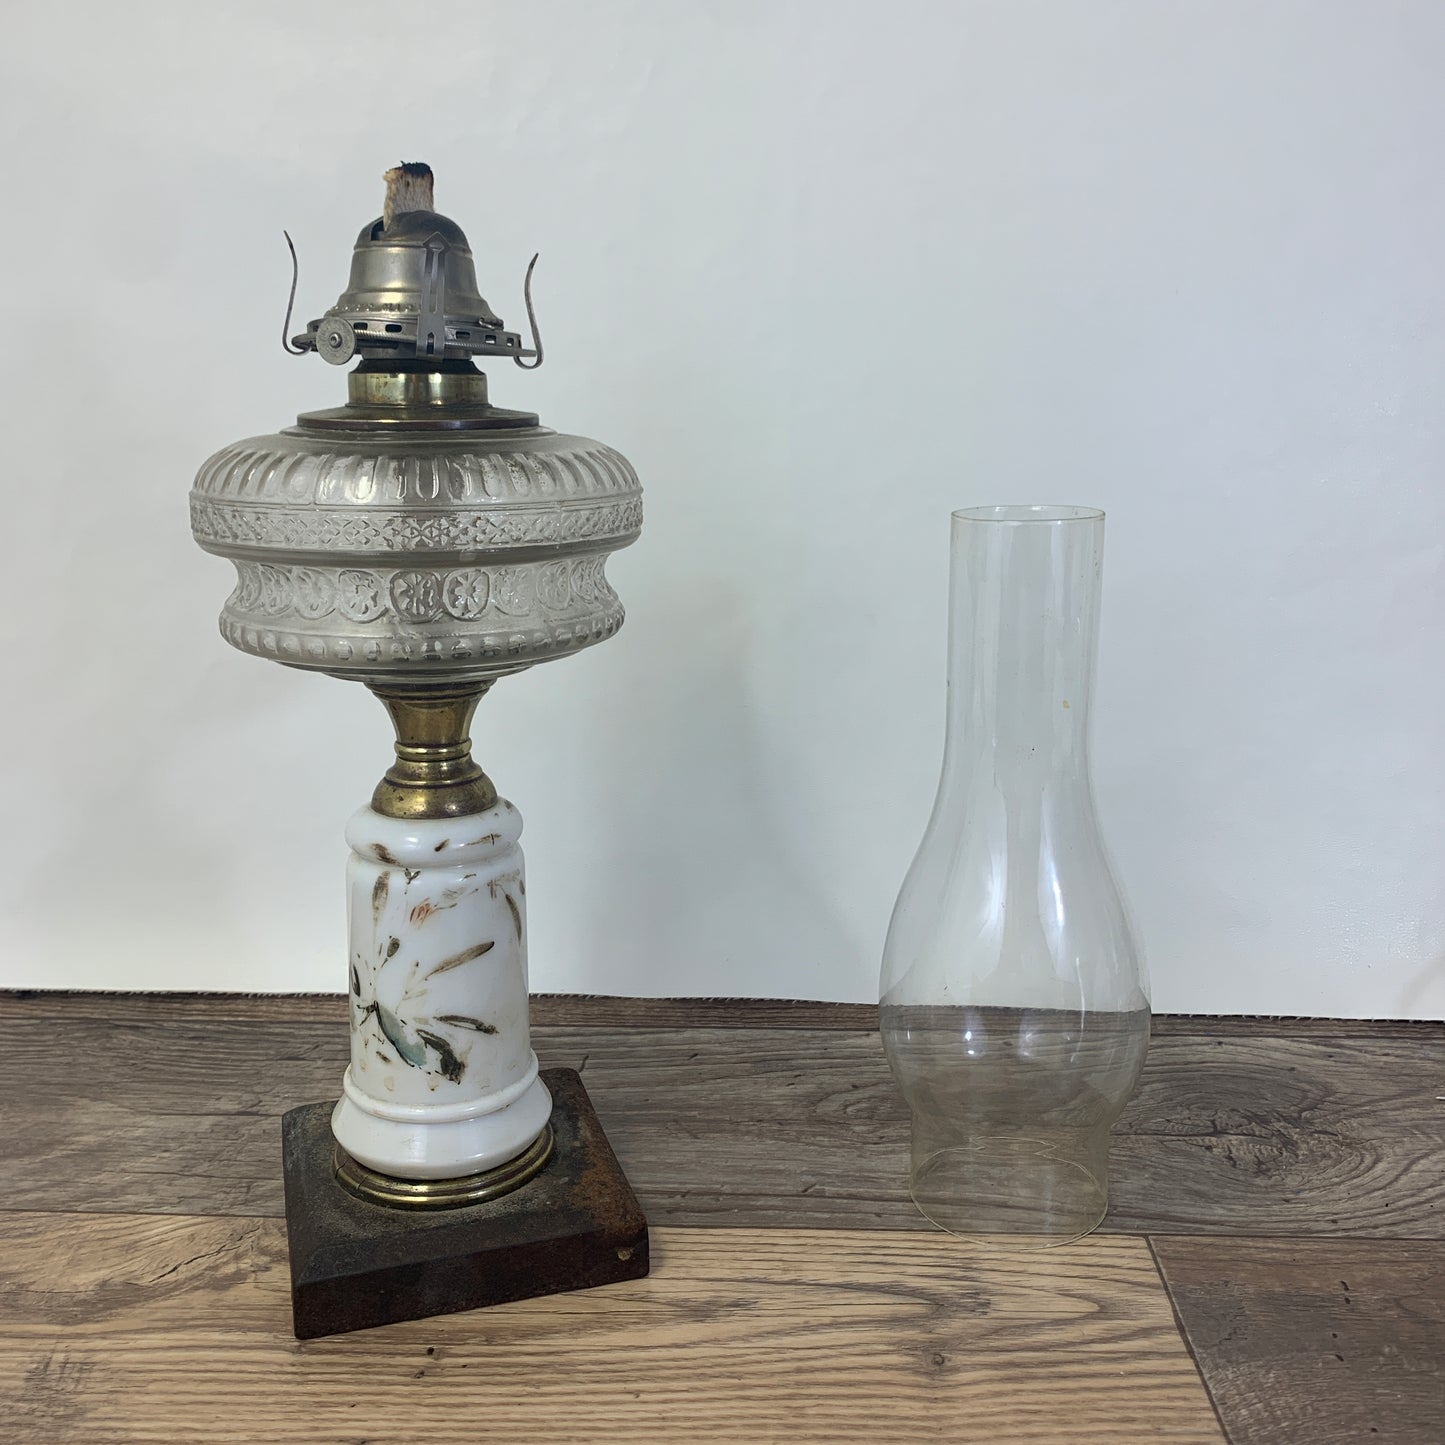 Antique EAPG Oil Lamp Hand Painted Milk Glass Pedestal Early American Pressed Glass, White Flame Burner